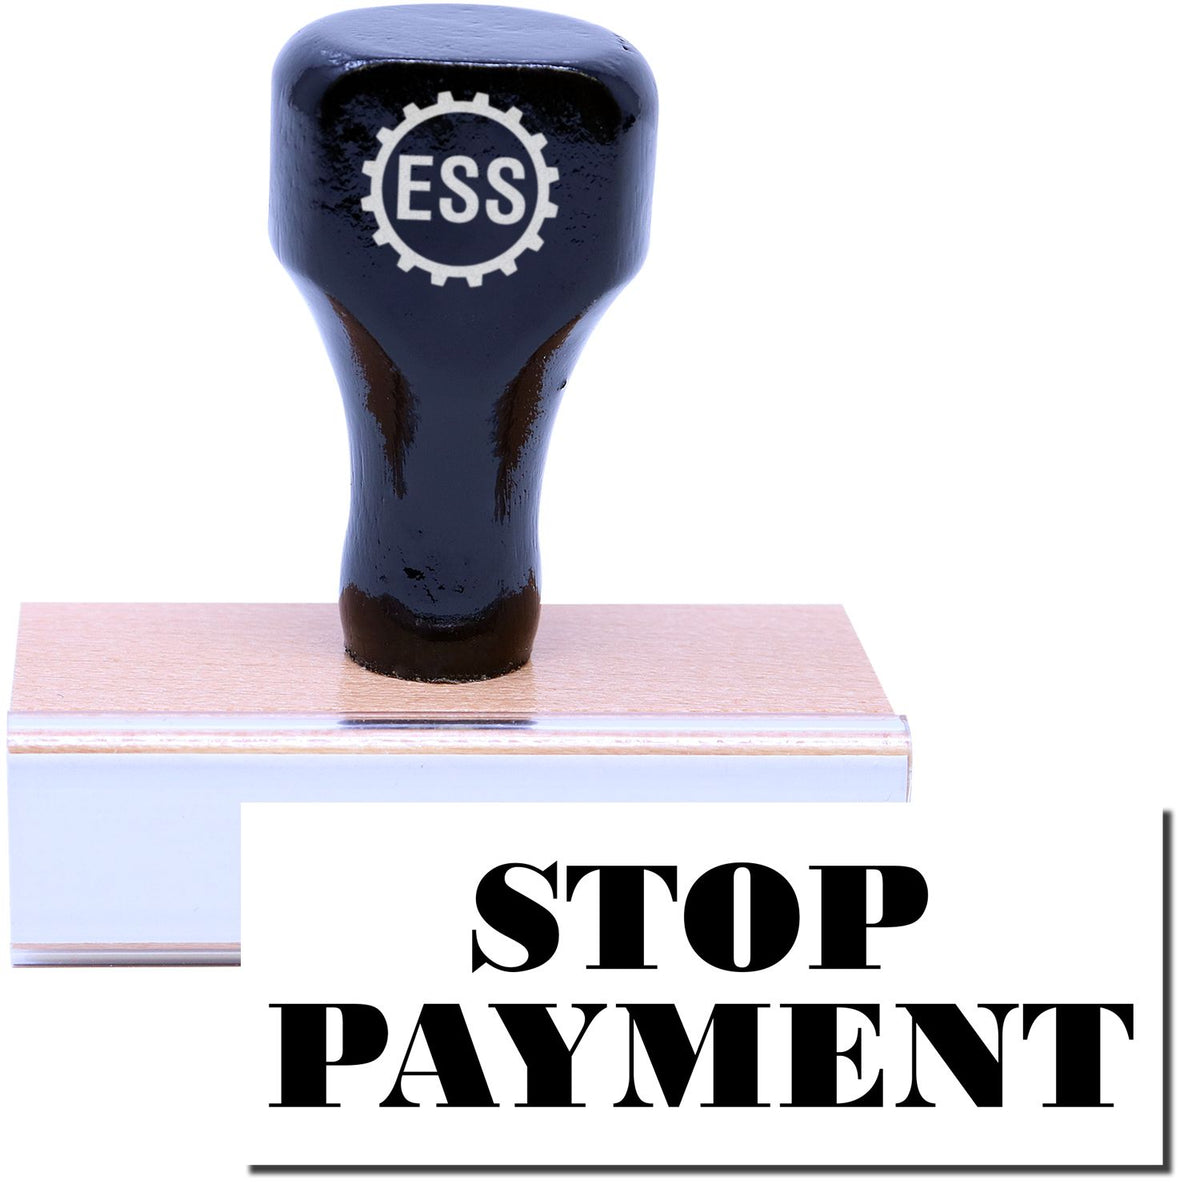 A stock office rubber stamp with a stamped image showing how the text &quot;STOP PAYMENT&quot; in a large font is displayed after stamping.